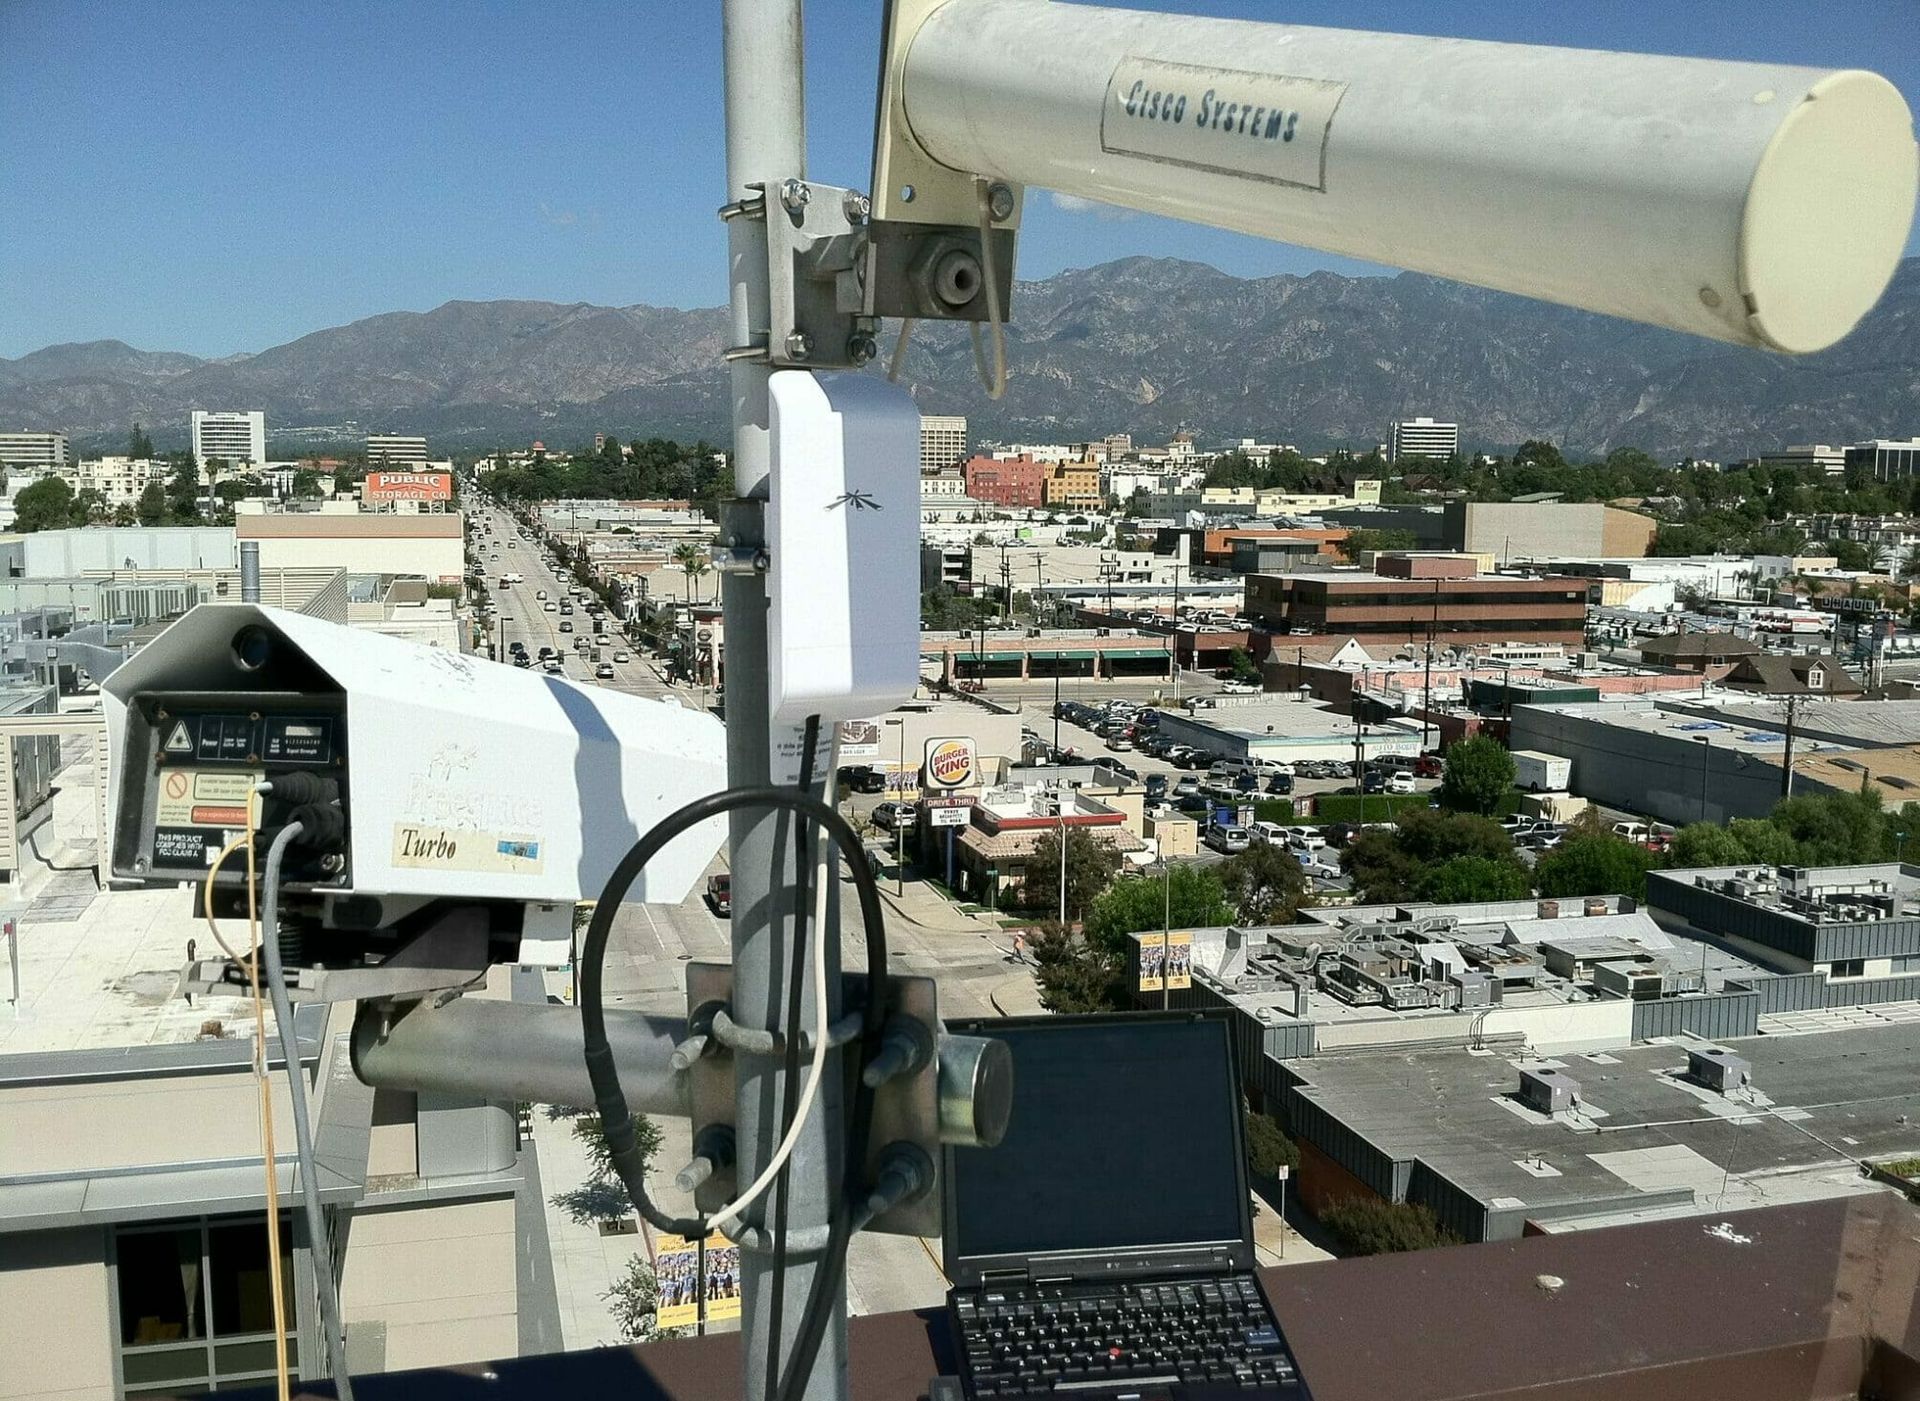 &#8220;Ubiquiti NanoStation Wireless Bridge &#8211; Up and running.&#8221; Ubiquiti experienced a breach that may have exposed customer data. By KN6KS is licensed under CC BY-NC 2.0